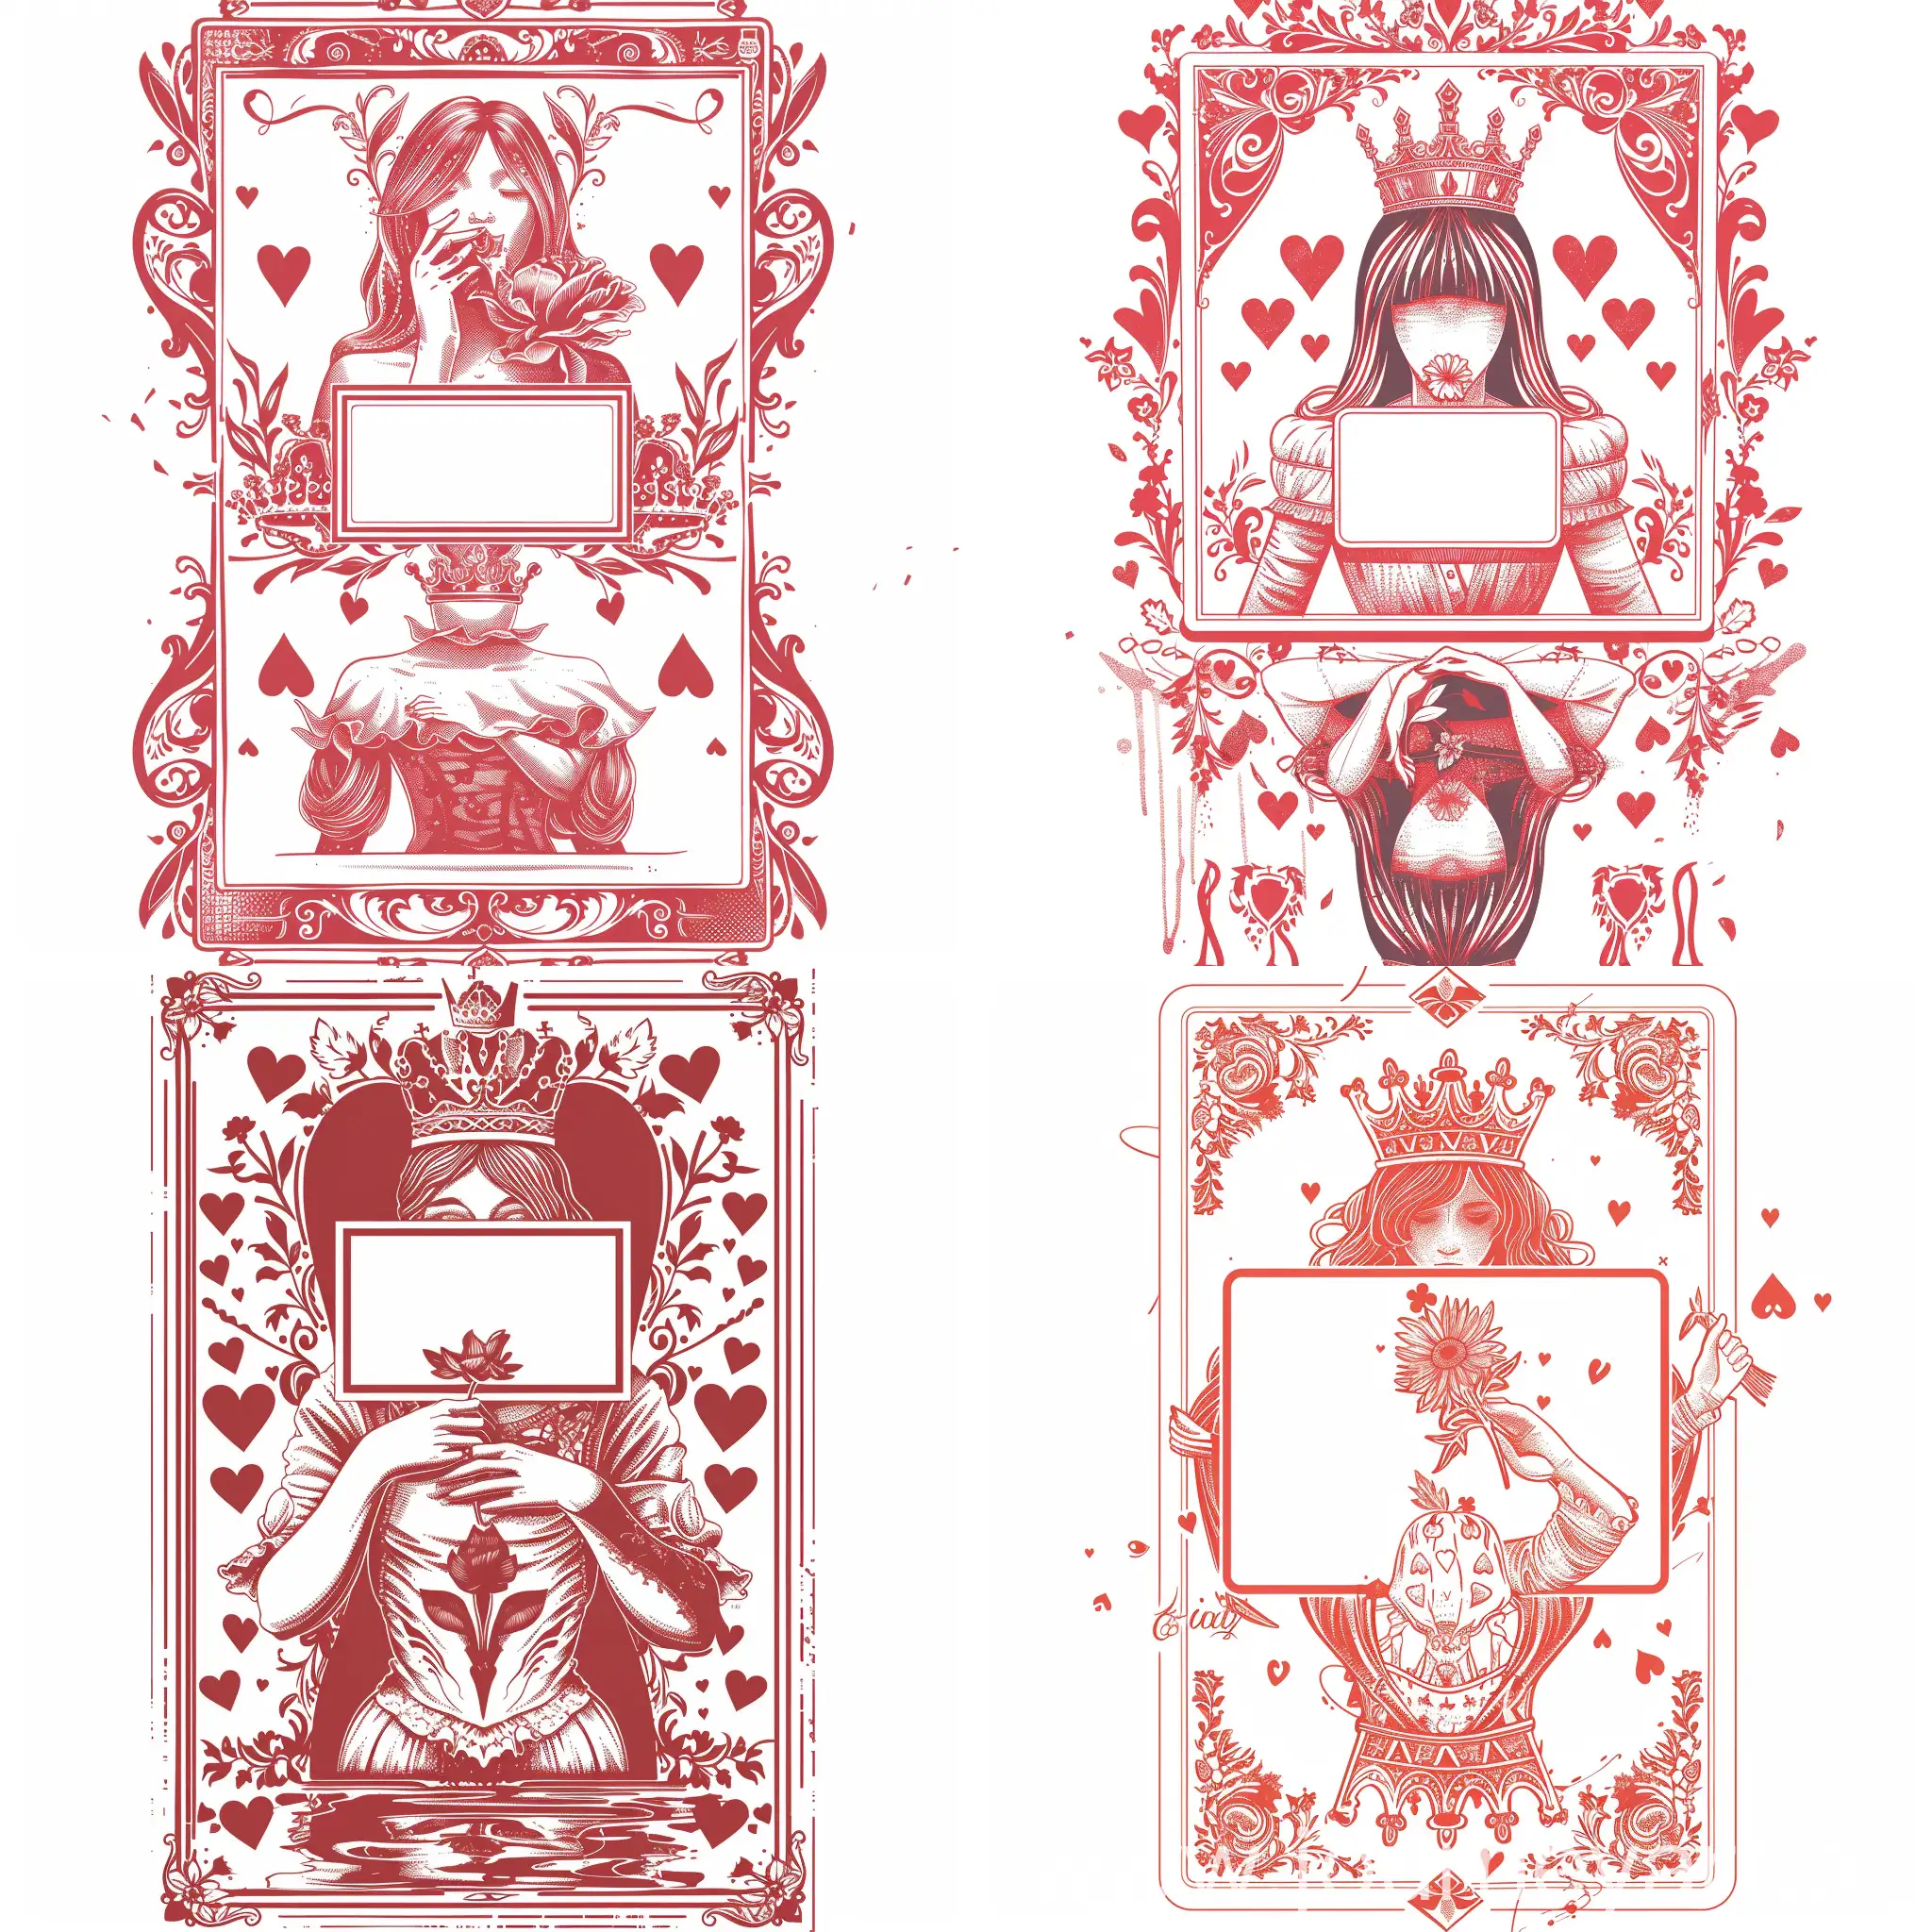 Queen-of-Hearts-Stylized-Playing-Card-with-Floral-Motif